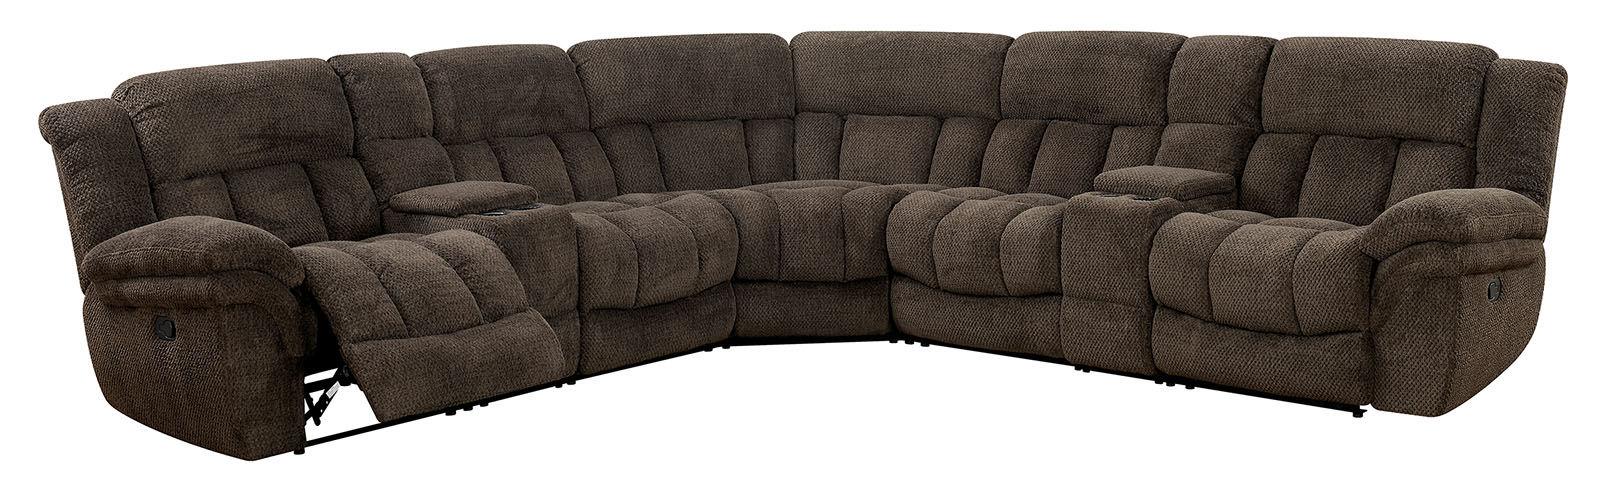 Transitional Recliner Sectional CM6585BR-SECT Irene CM6585BR-SECT in Brown 